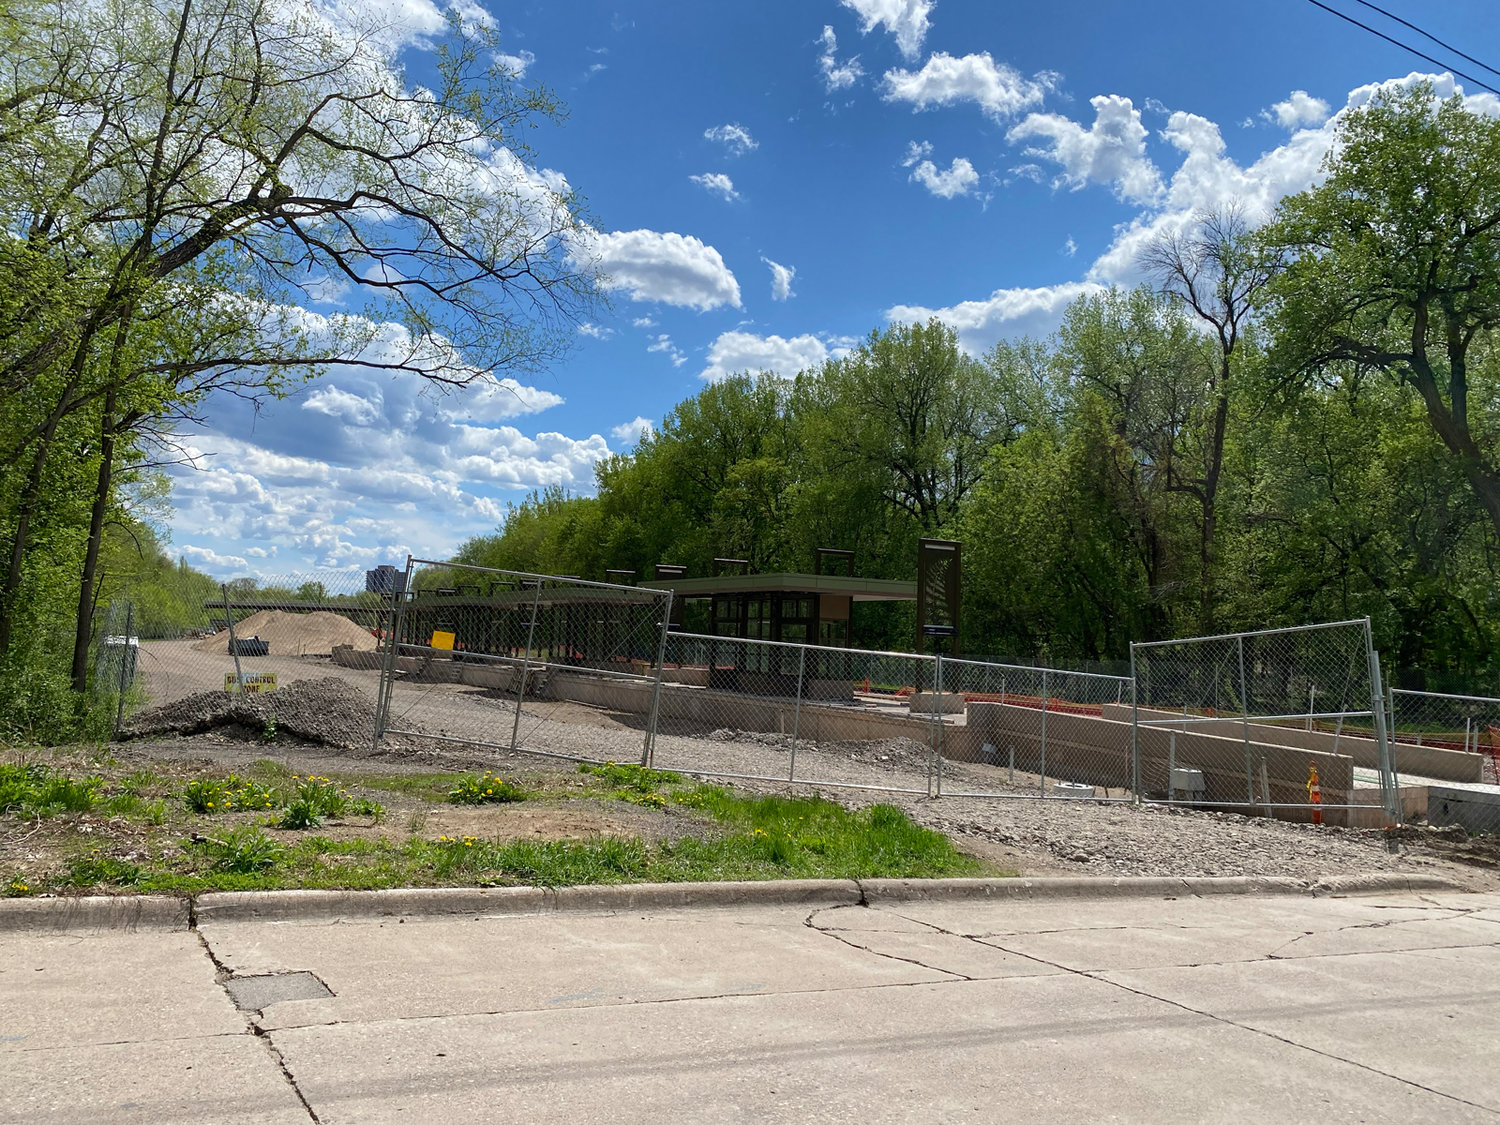 The Kenilworth Trail will remain closed until the completion of the LRT tunnel construction sometime in 2025. A detour is posted. On Monday, May 23, the long-term closure of Cedar Lake Parkway begins. It will last through spring 2023 while the Kenilworth tunnel is constructed. Pumps and generators will be running periodically overnight to manage water.